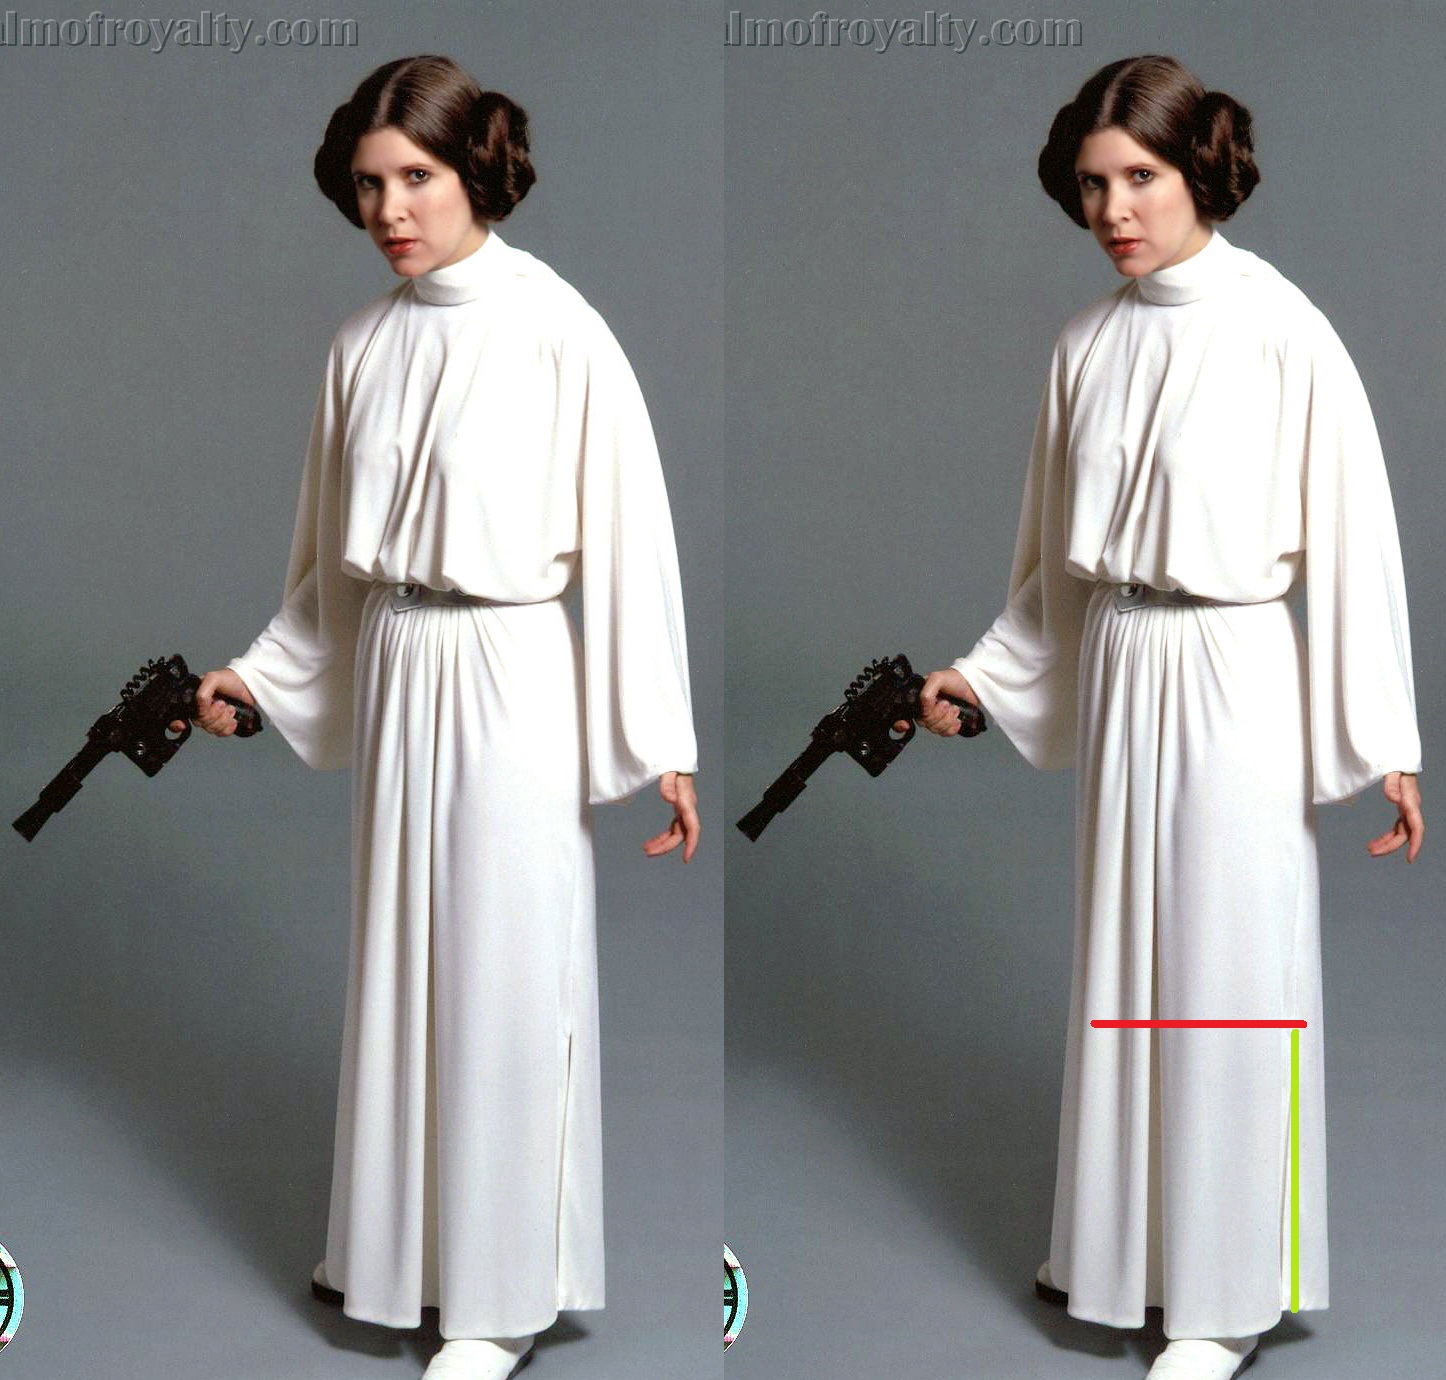 A New Hope Leia S Political Gown Diy The Galaxy Of Star Wars